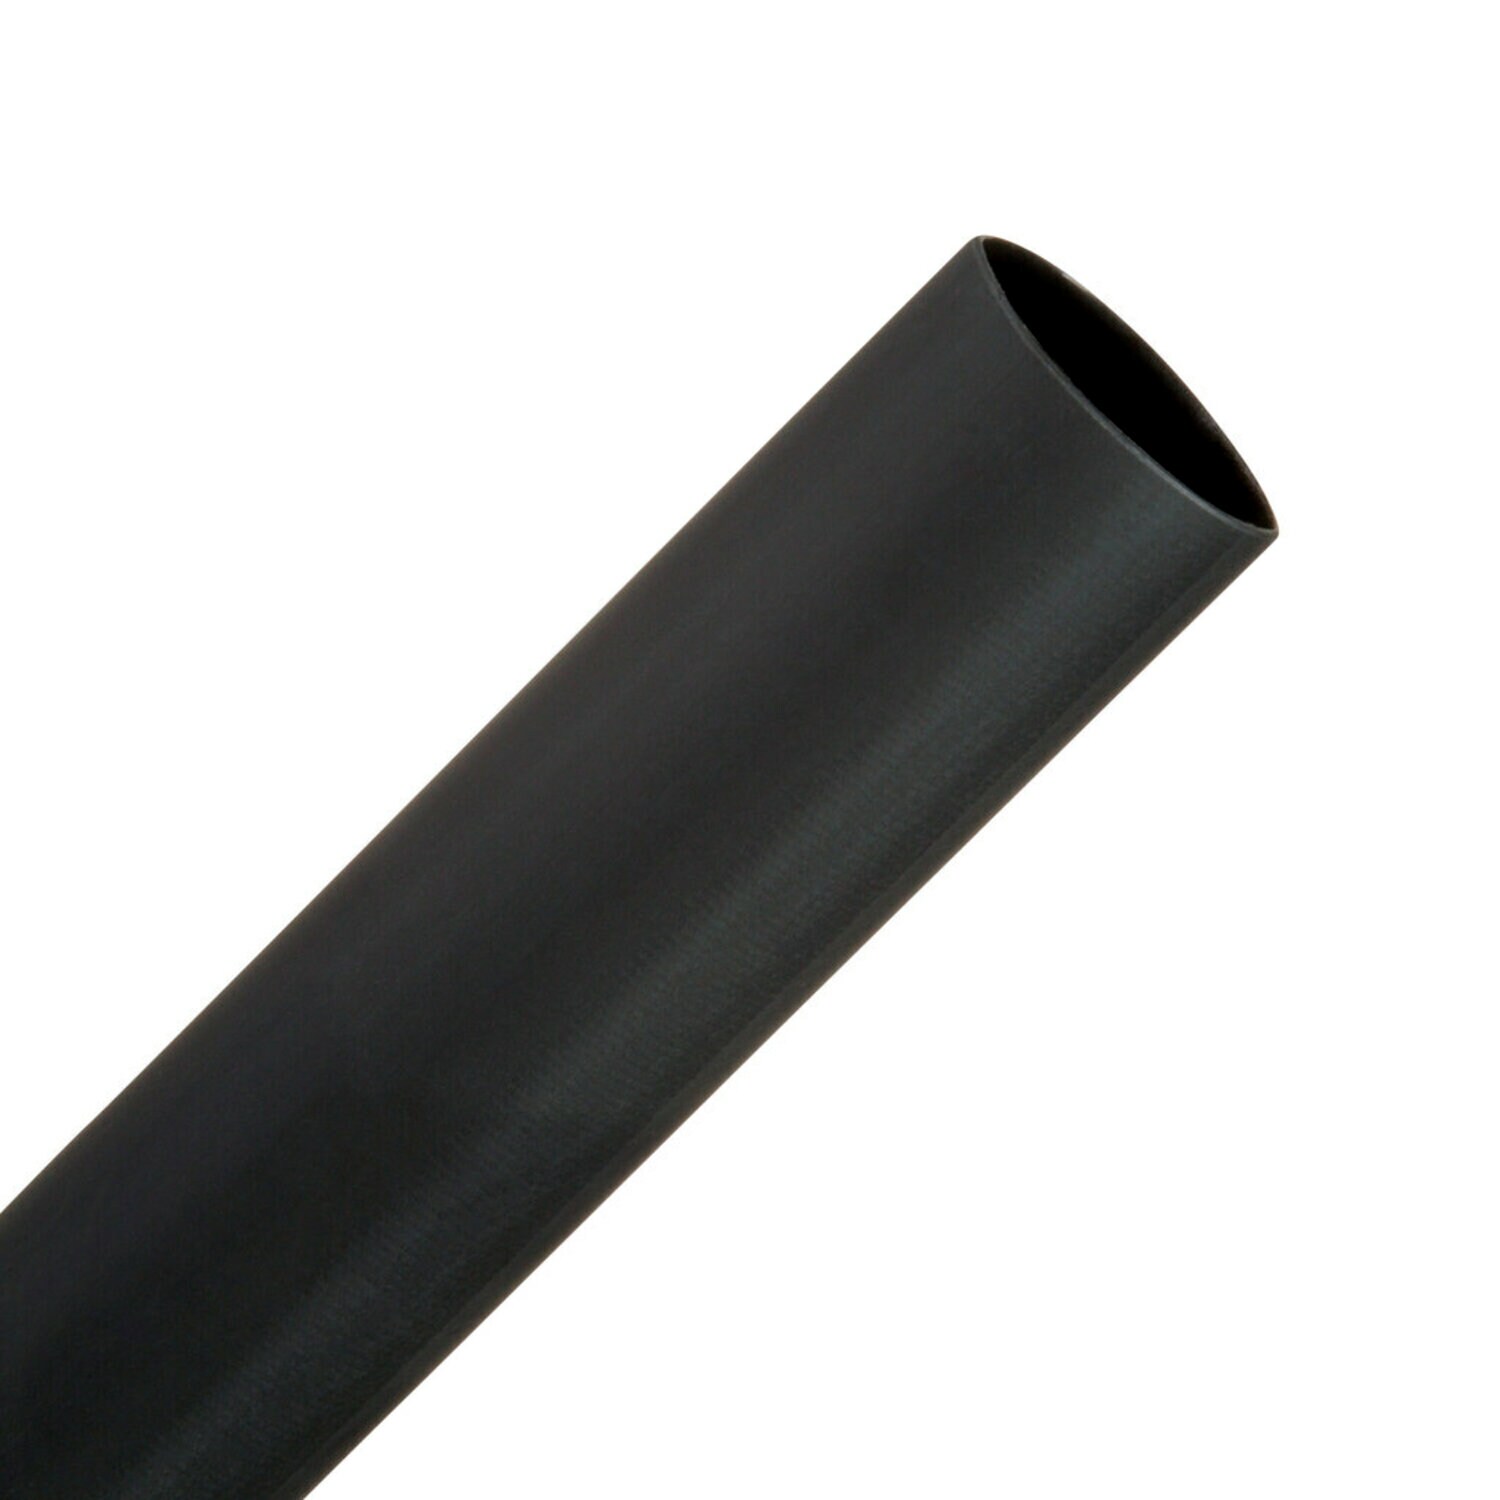 7010396825 - 3M Thin-Wall Heat Shrink Tubing EPS-300, Adhesive-Lined, 1" Black 2-in
piece, 1000/Case